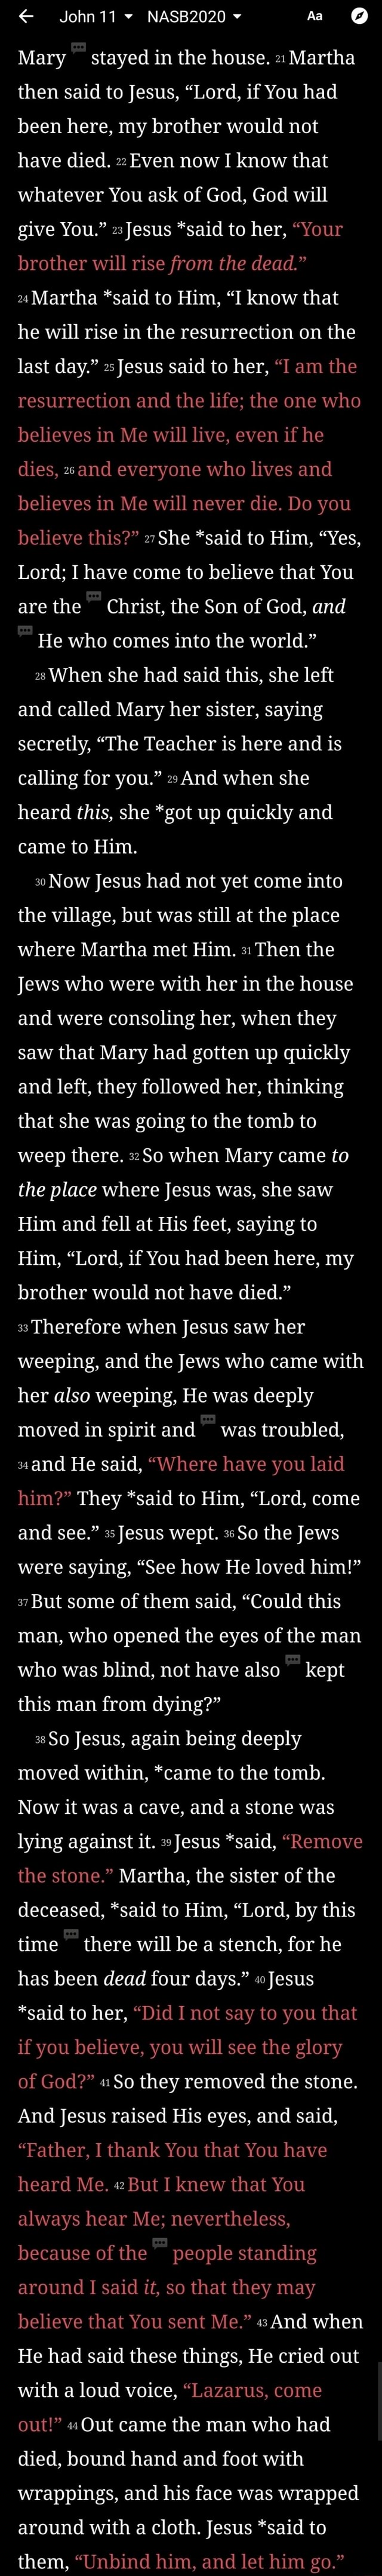 Mary stayed in the house. Martha then said to Jesus, Lord 